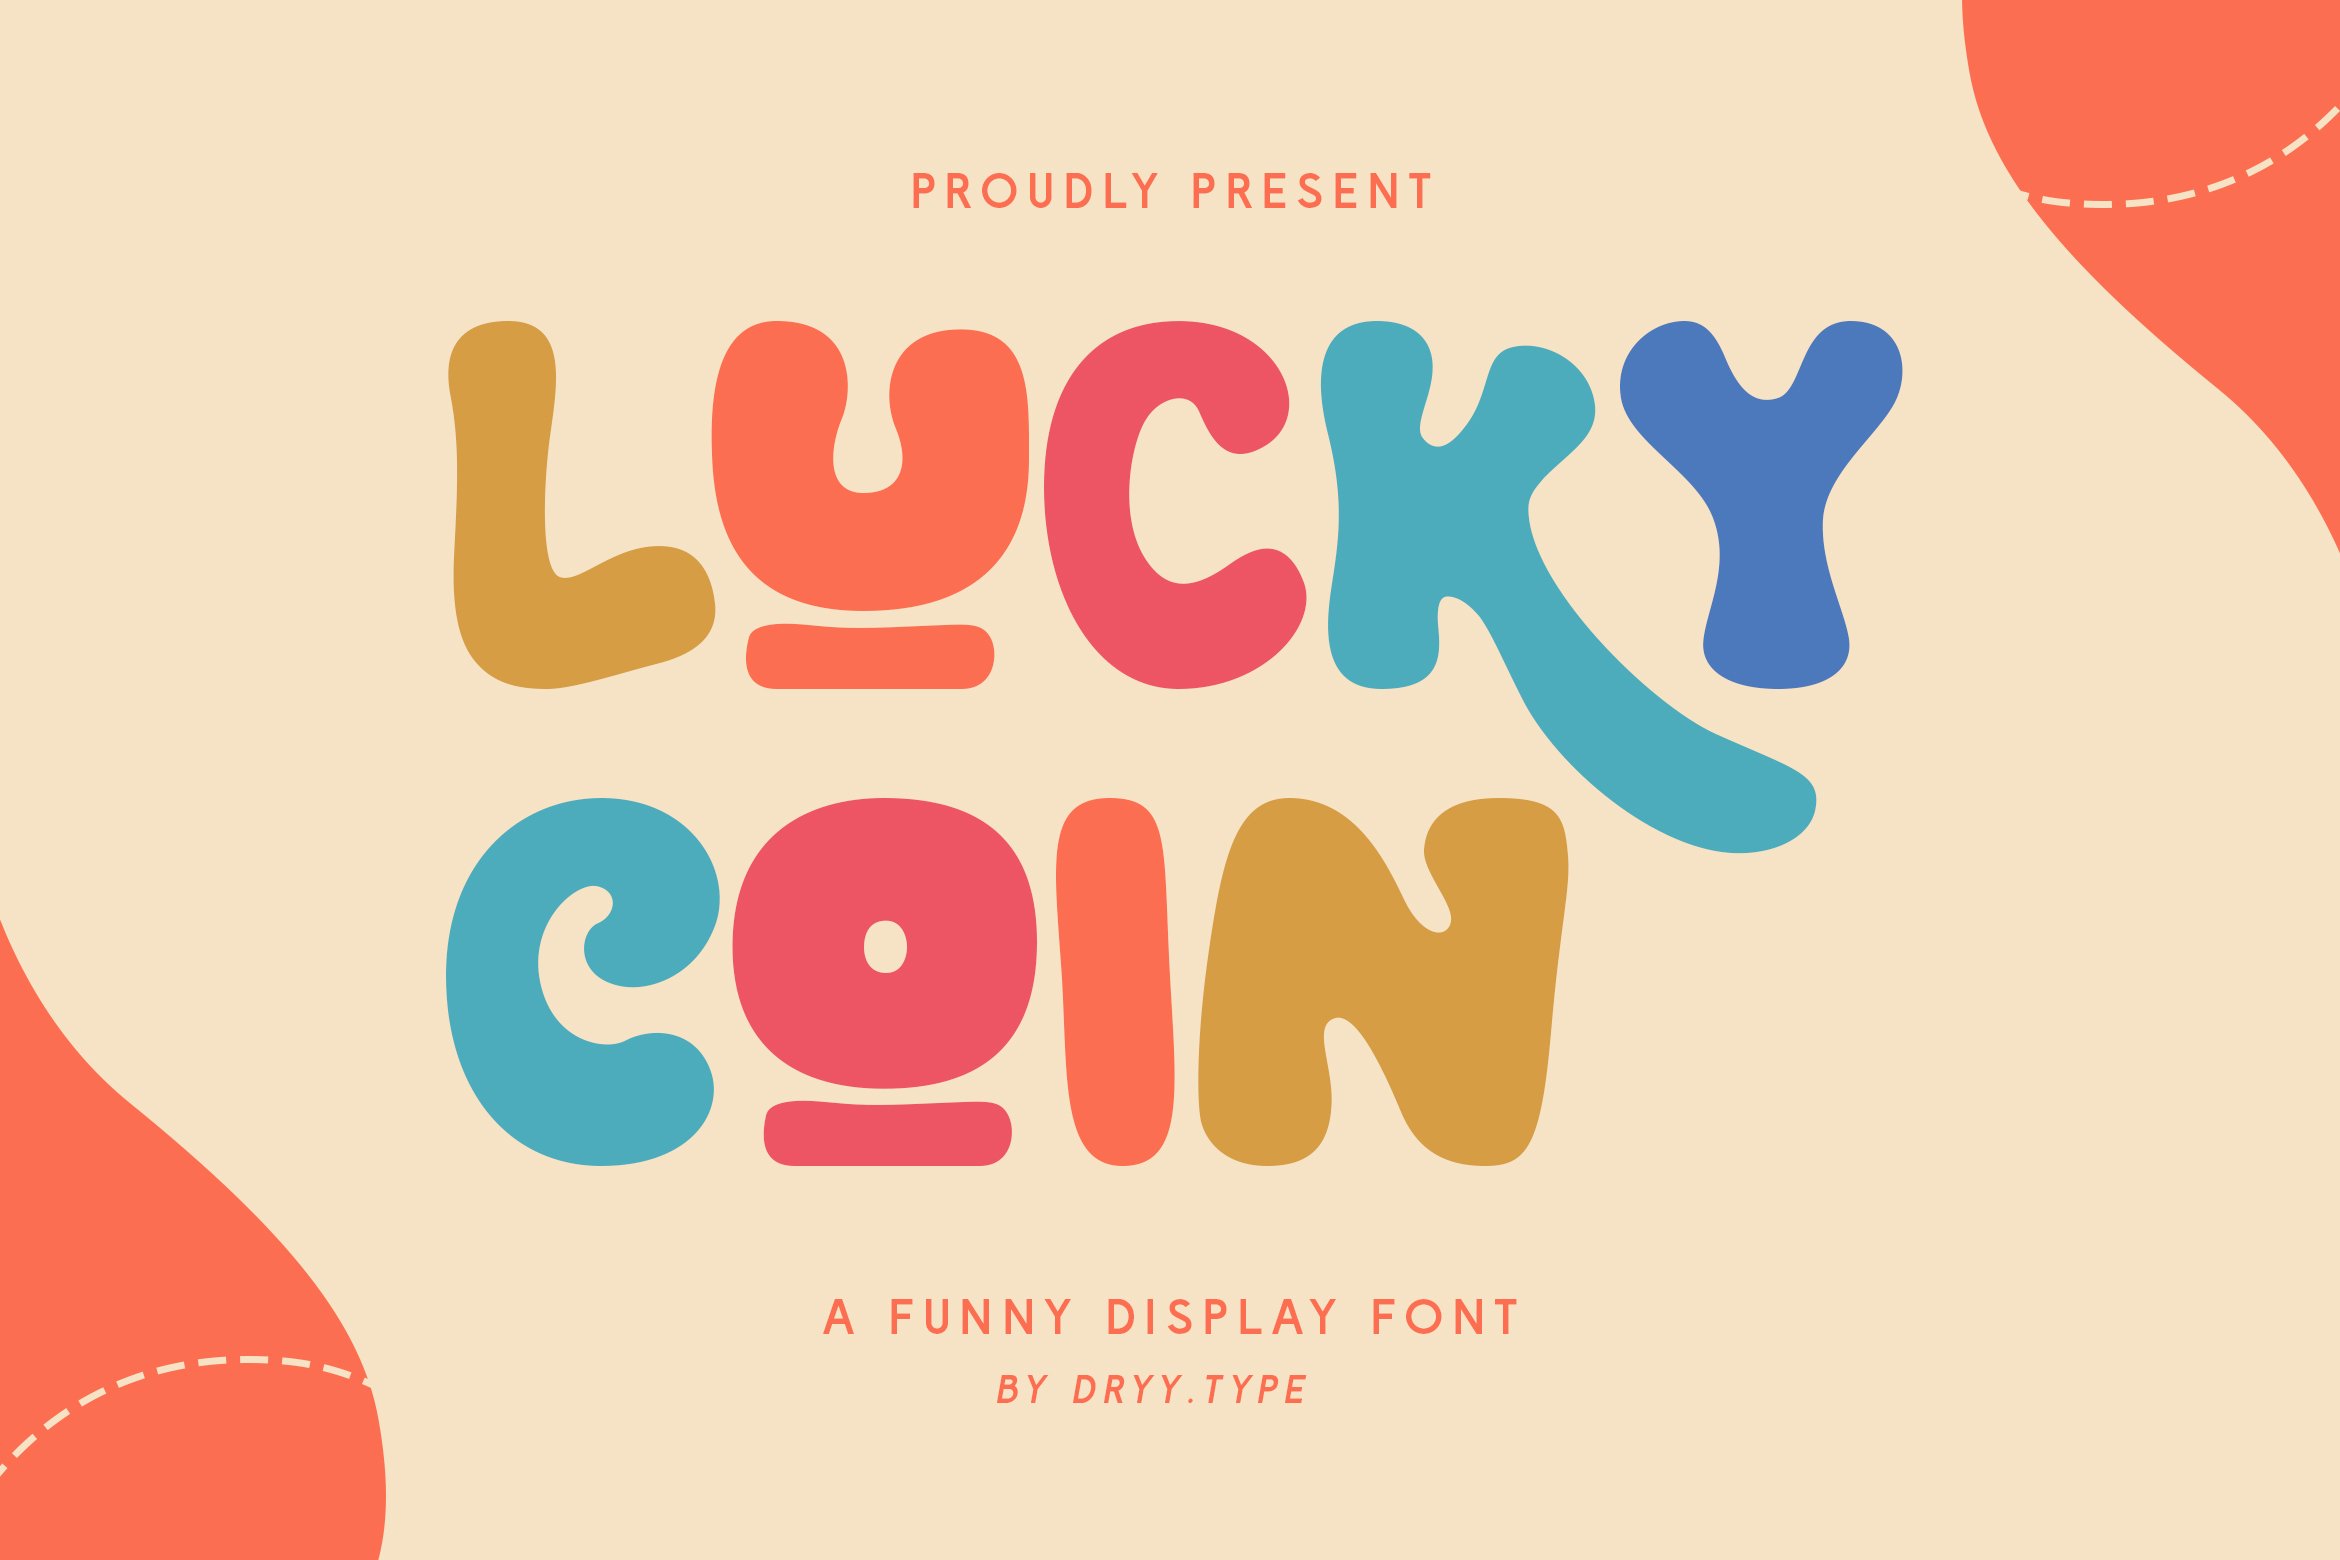 Lucky Coin - Cute Display font cover image.